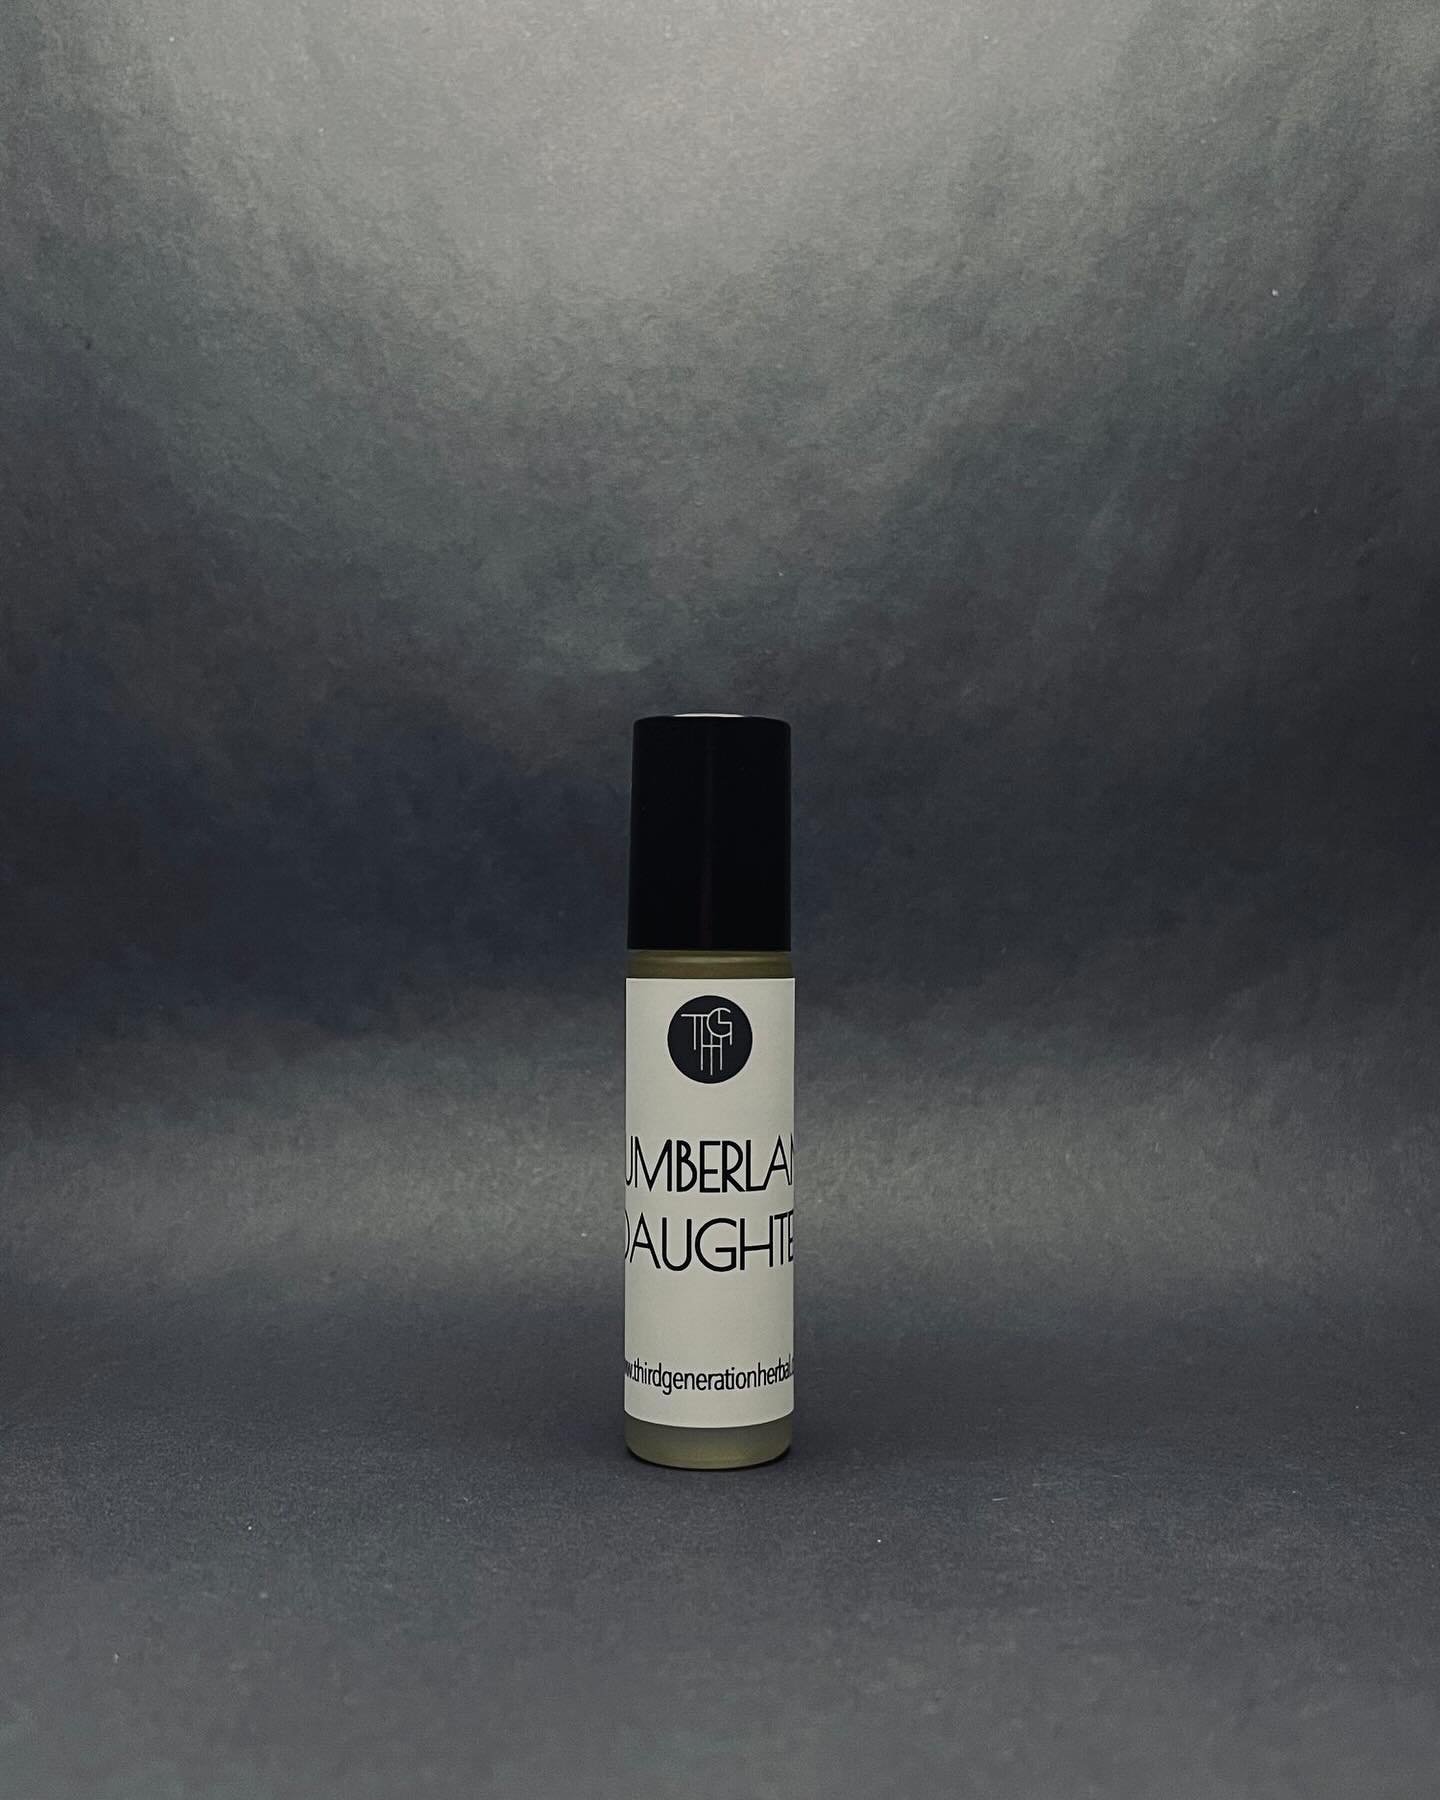 Cumberland Daughter

Floral, sweet, earthy, and uplifting. Inspired by southern weddings where the brides wear boots under dresses, flowers in their hair, dance barefoot with banjos, and their mama&rsquo;s lace mimics the wildflowers in the fields.

